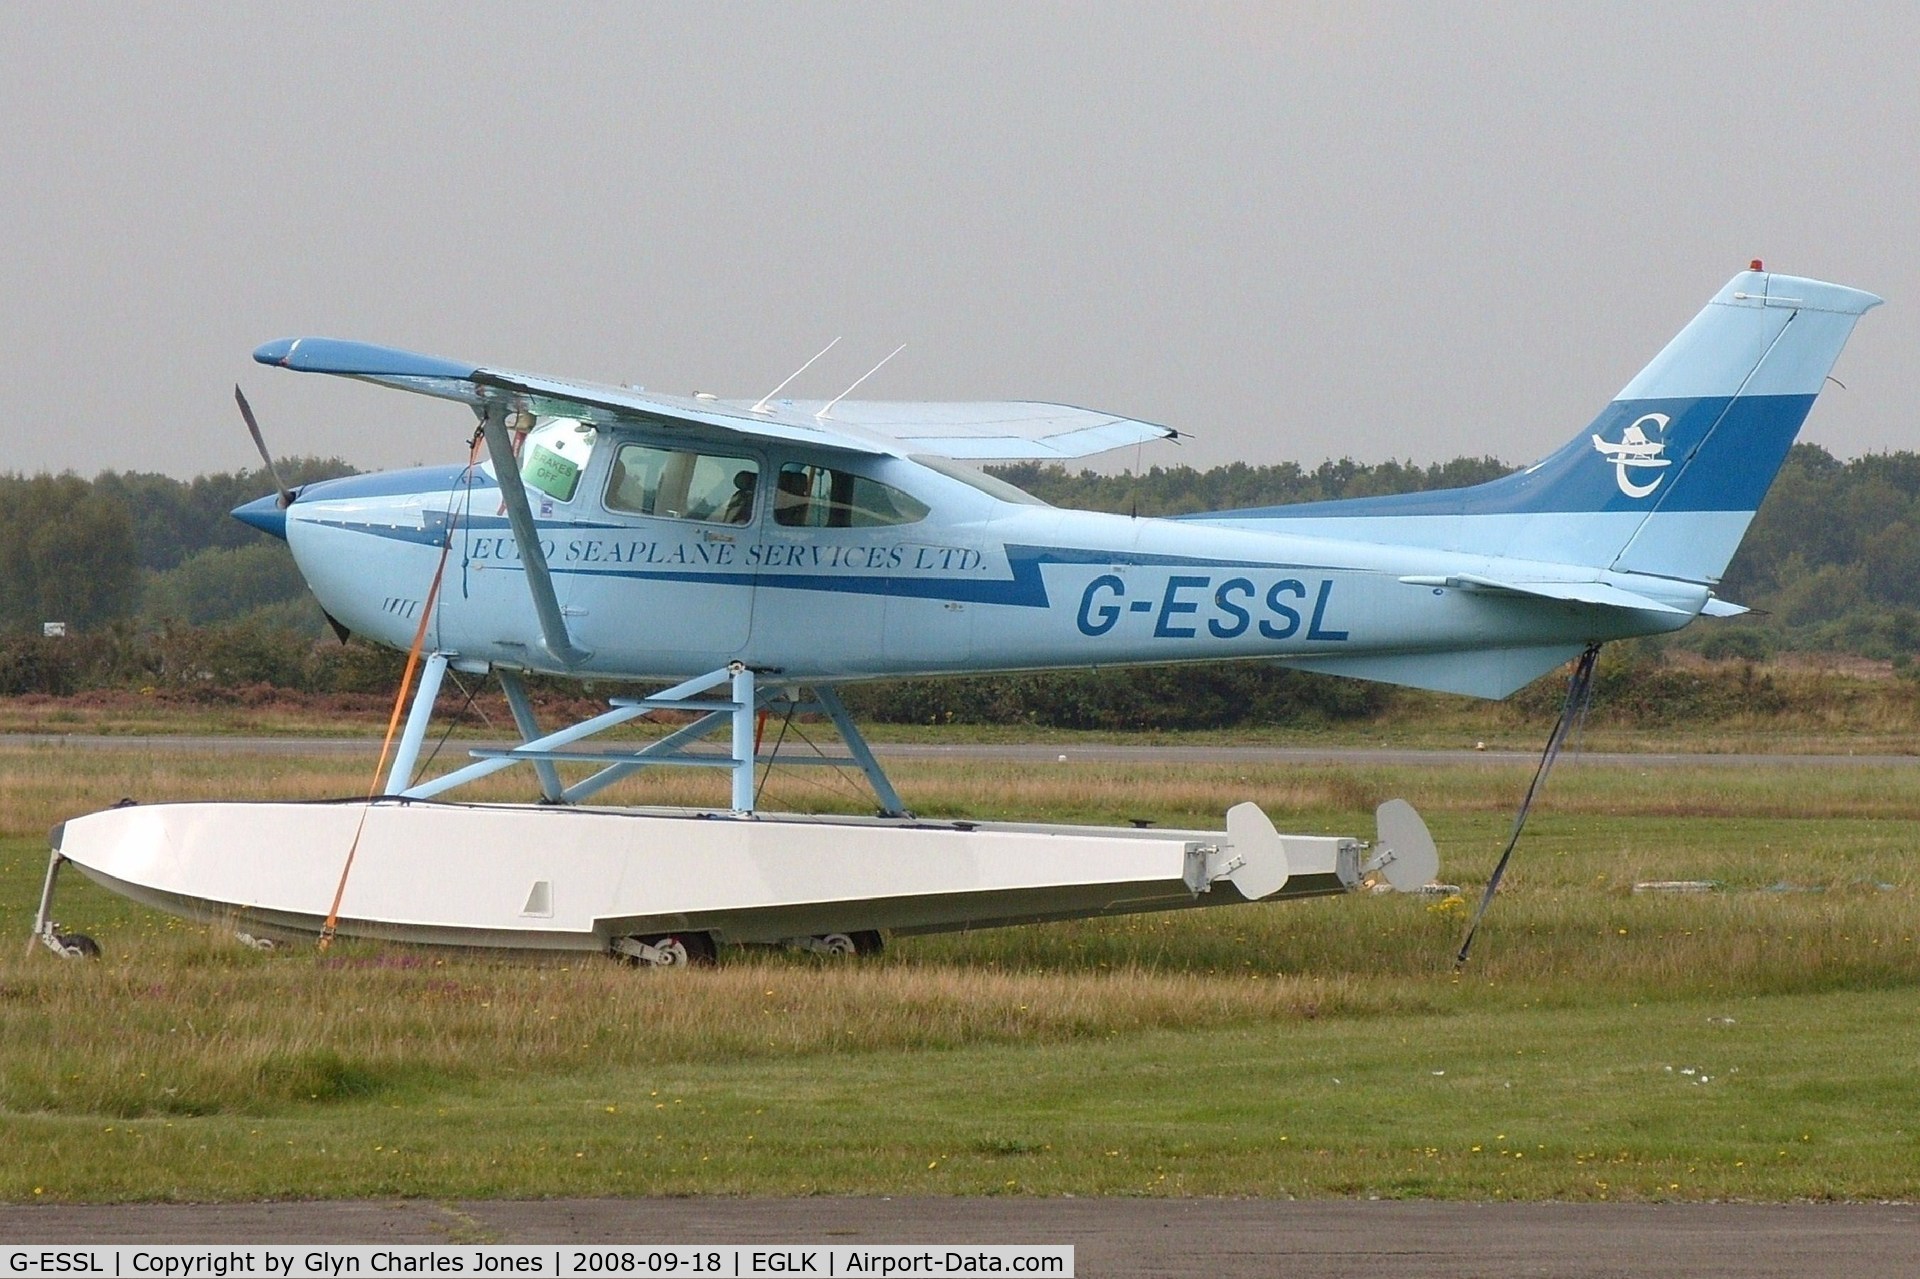 G-ESSL, 1981 Cessna 182R Skylane C/N 182-67947, An amphibian on dry land, 'brakes off' notice in cockpit! Previously D-EIMP and PH-AXP. Operated by Euro Seaplane Services Ltd.